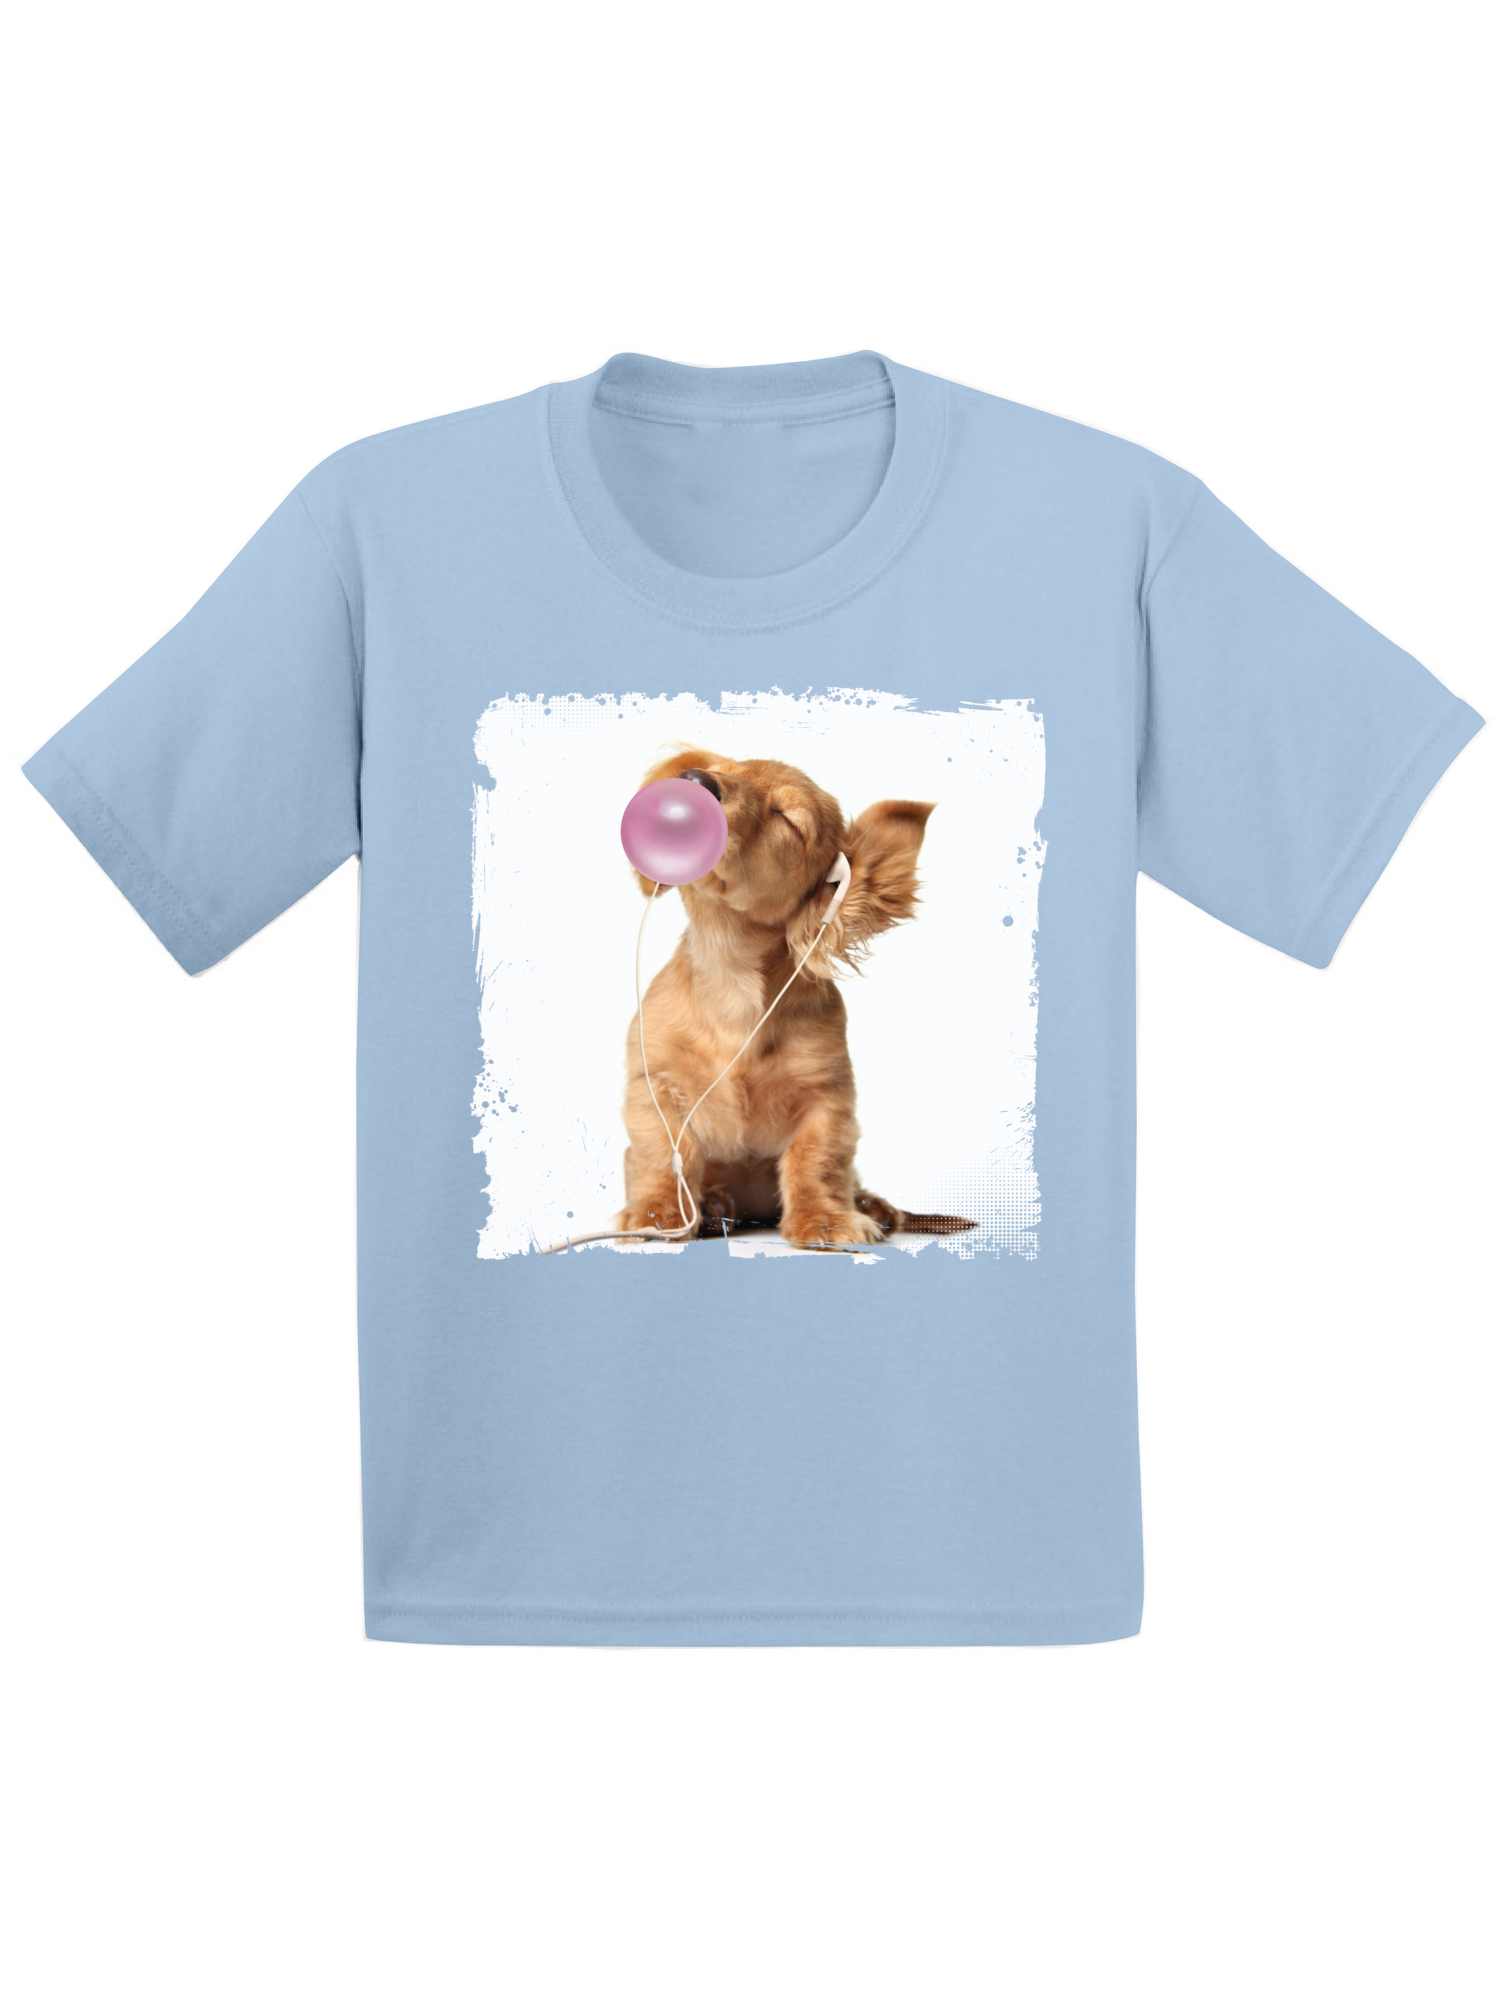 Awkward Styles Puppy for Kids Dog Tshirt Puppy Dog Toddler Shirt Toddler T Shirt Kids Dog Outfit New Animal Collection Funny Puppy Dog with Gum Puppy Clothing Puppy Lovers Funny Gifts for Kids - image 1 of 4